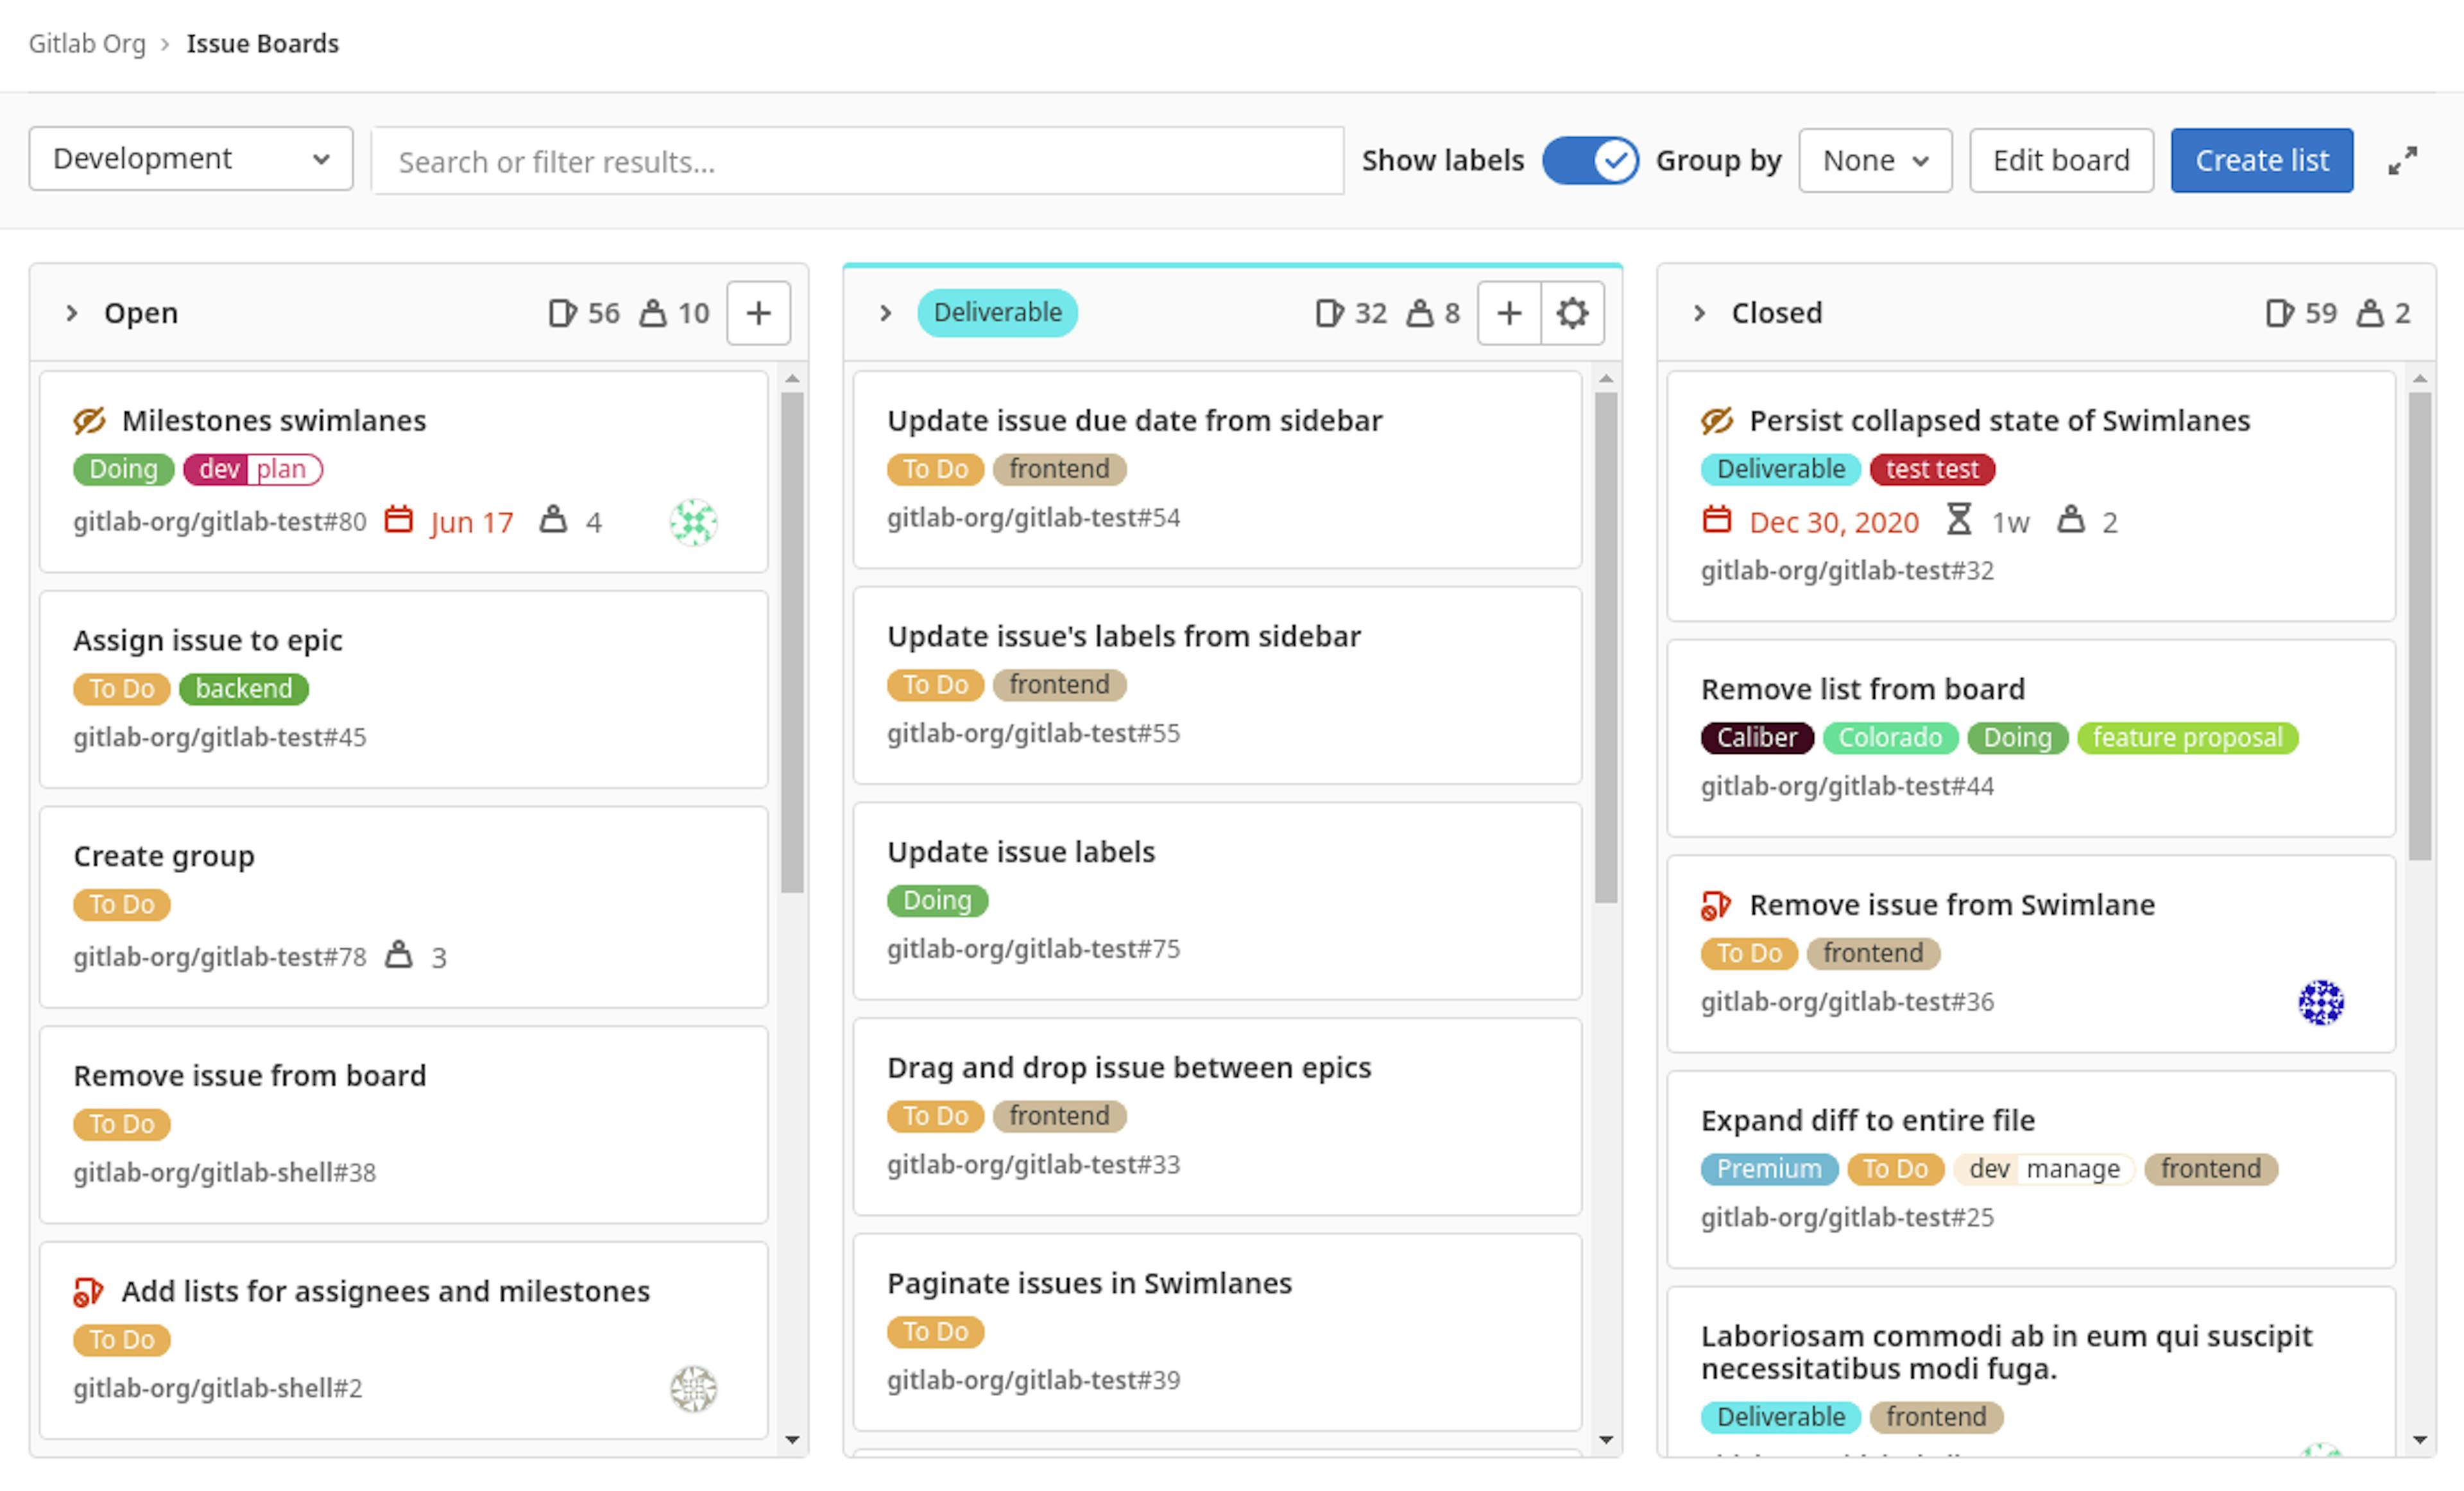 An image of a GitLab project example board.